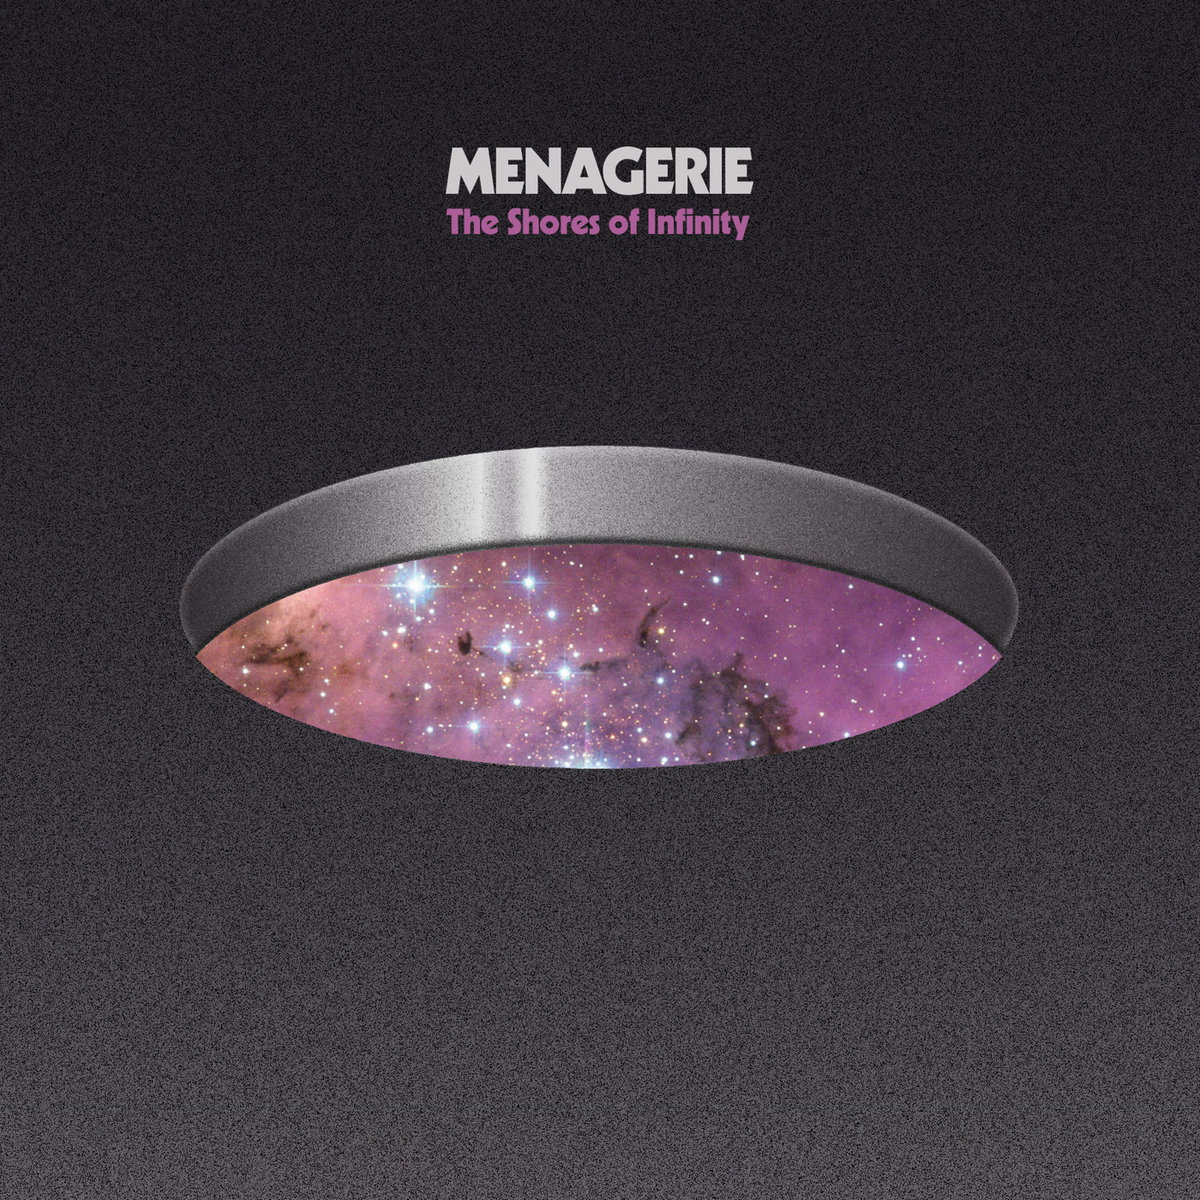 Menagerie - The Shores of Infinity